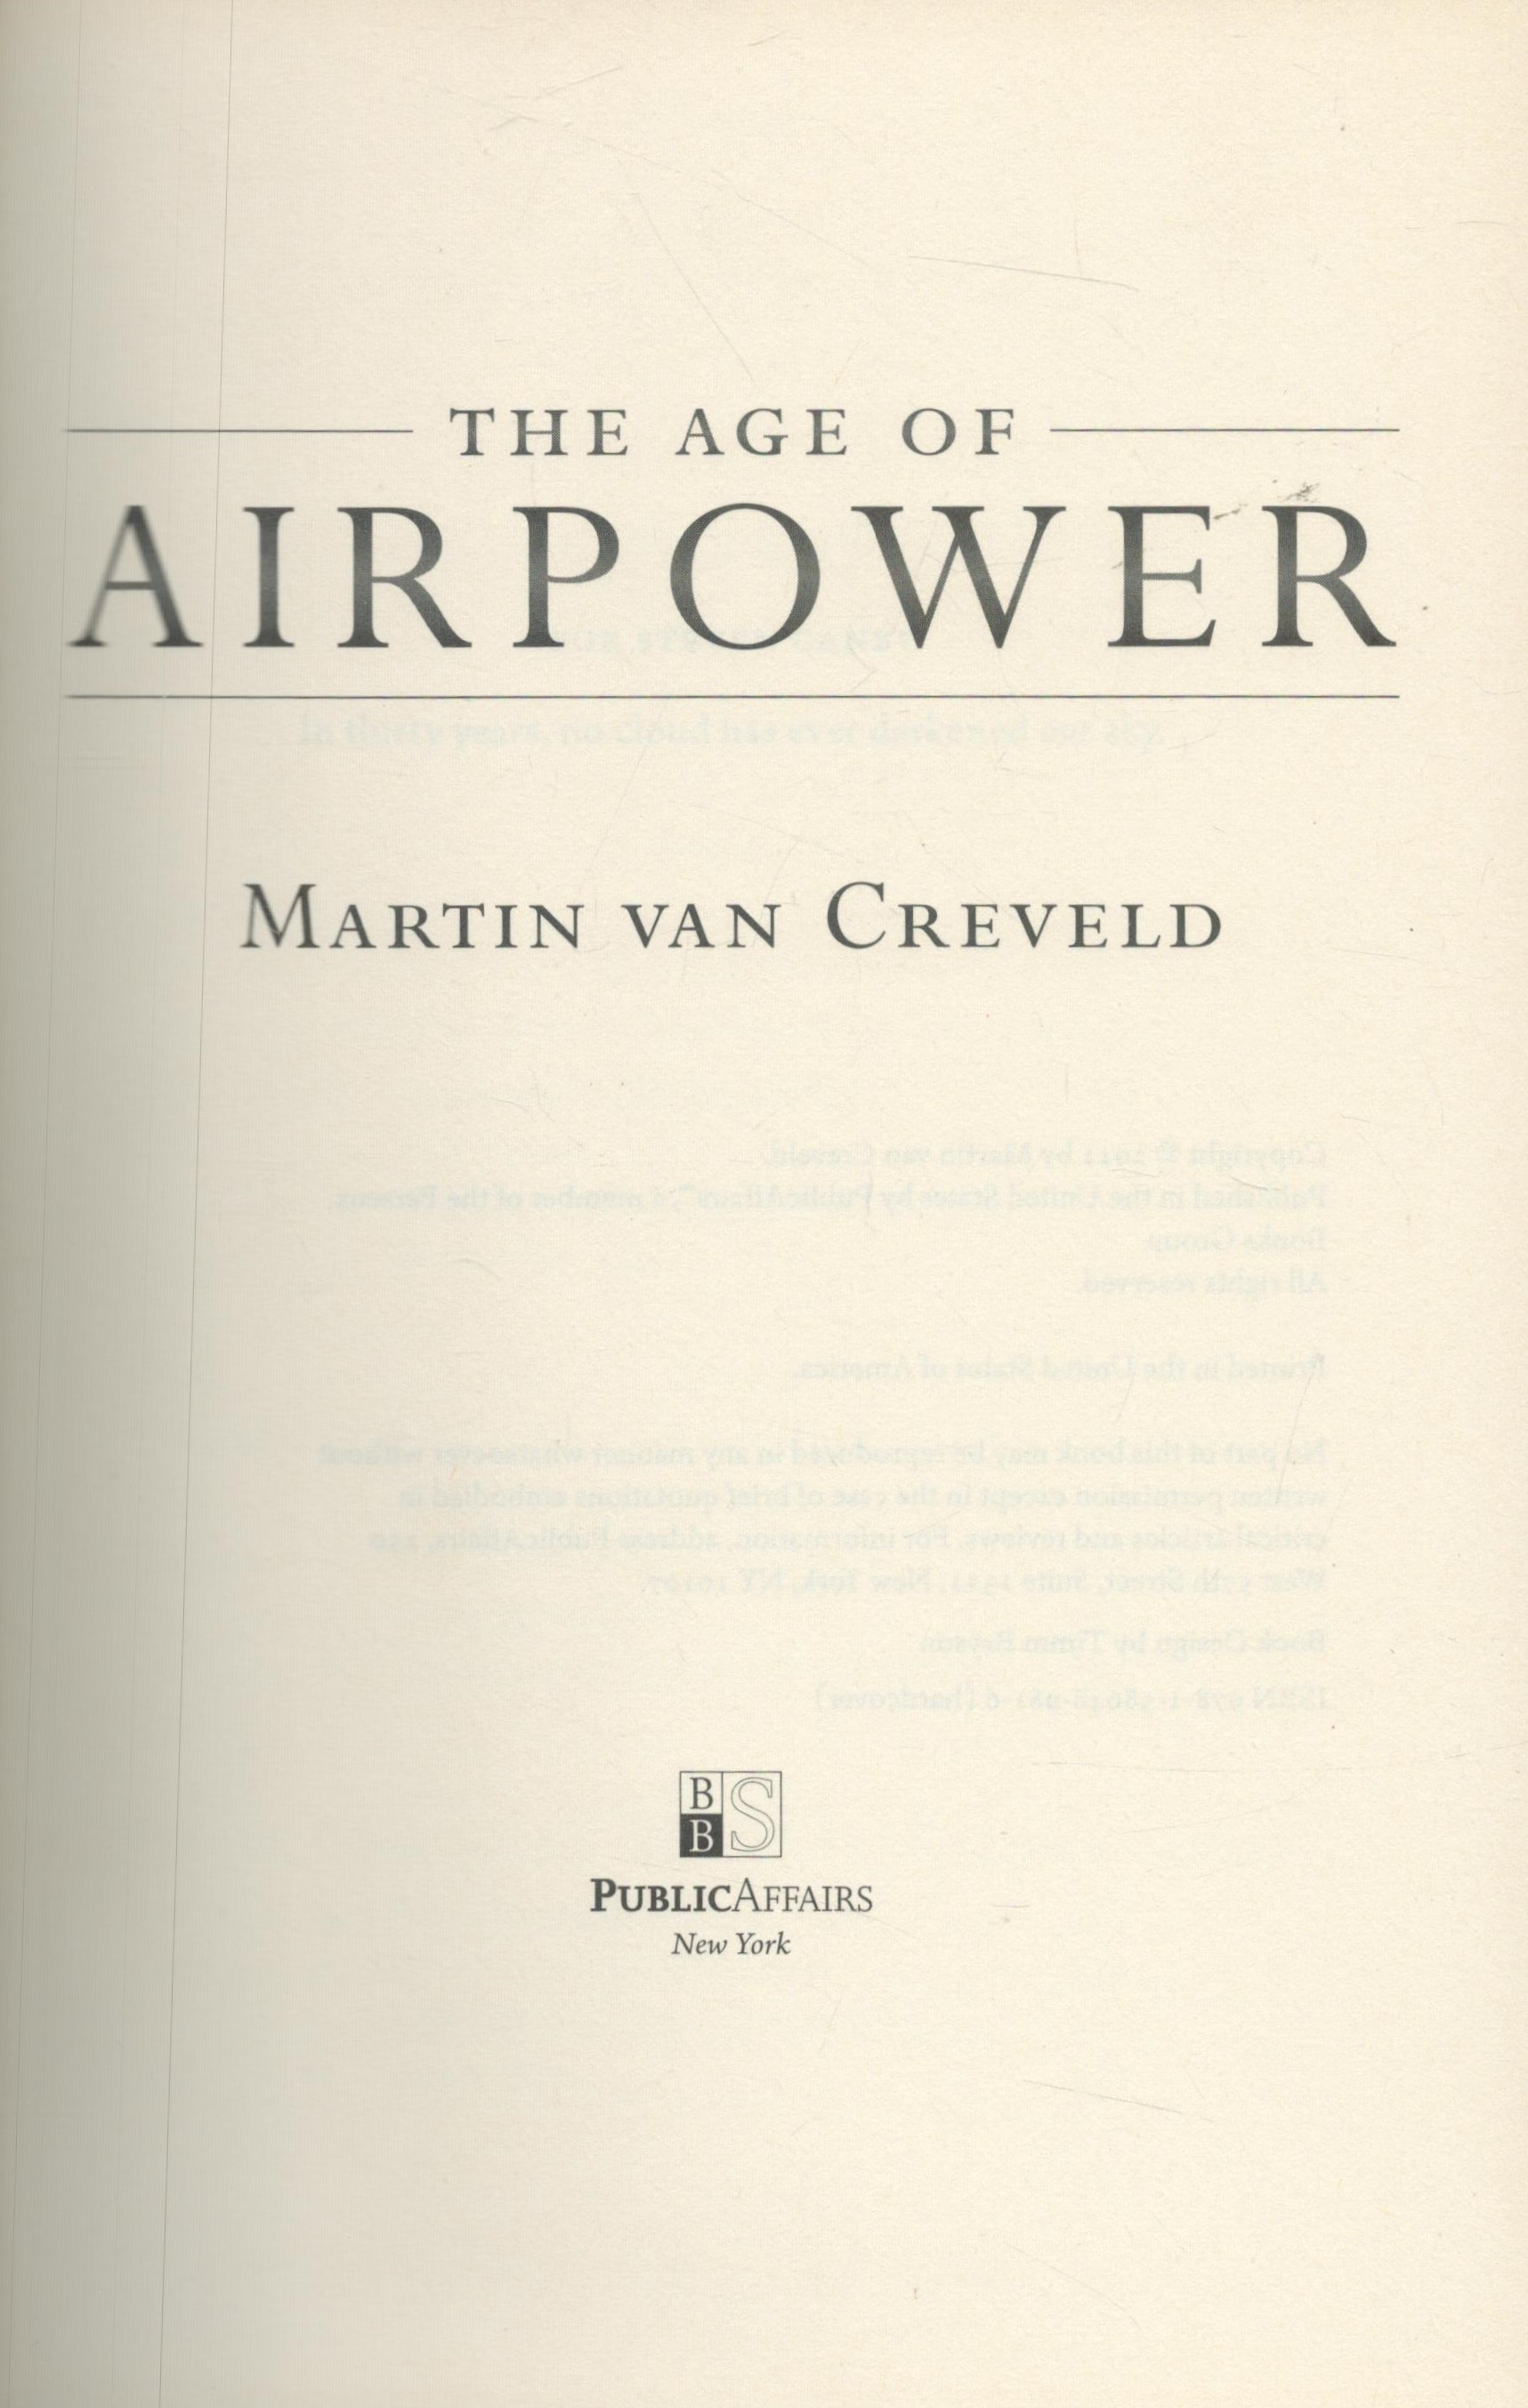 The Age of Airpower by Martin van Crevaeld 2011 First Edition Hardback Book with 498 pages published - Image 2 of 3